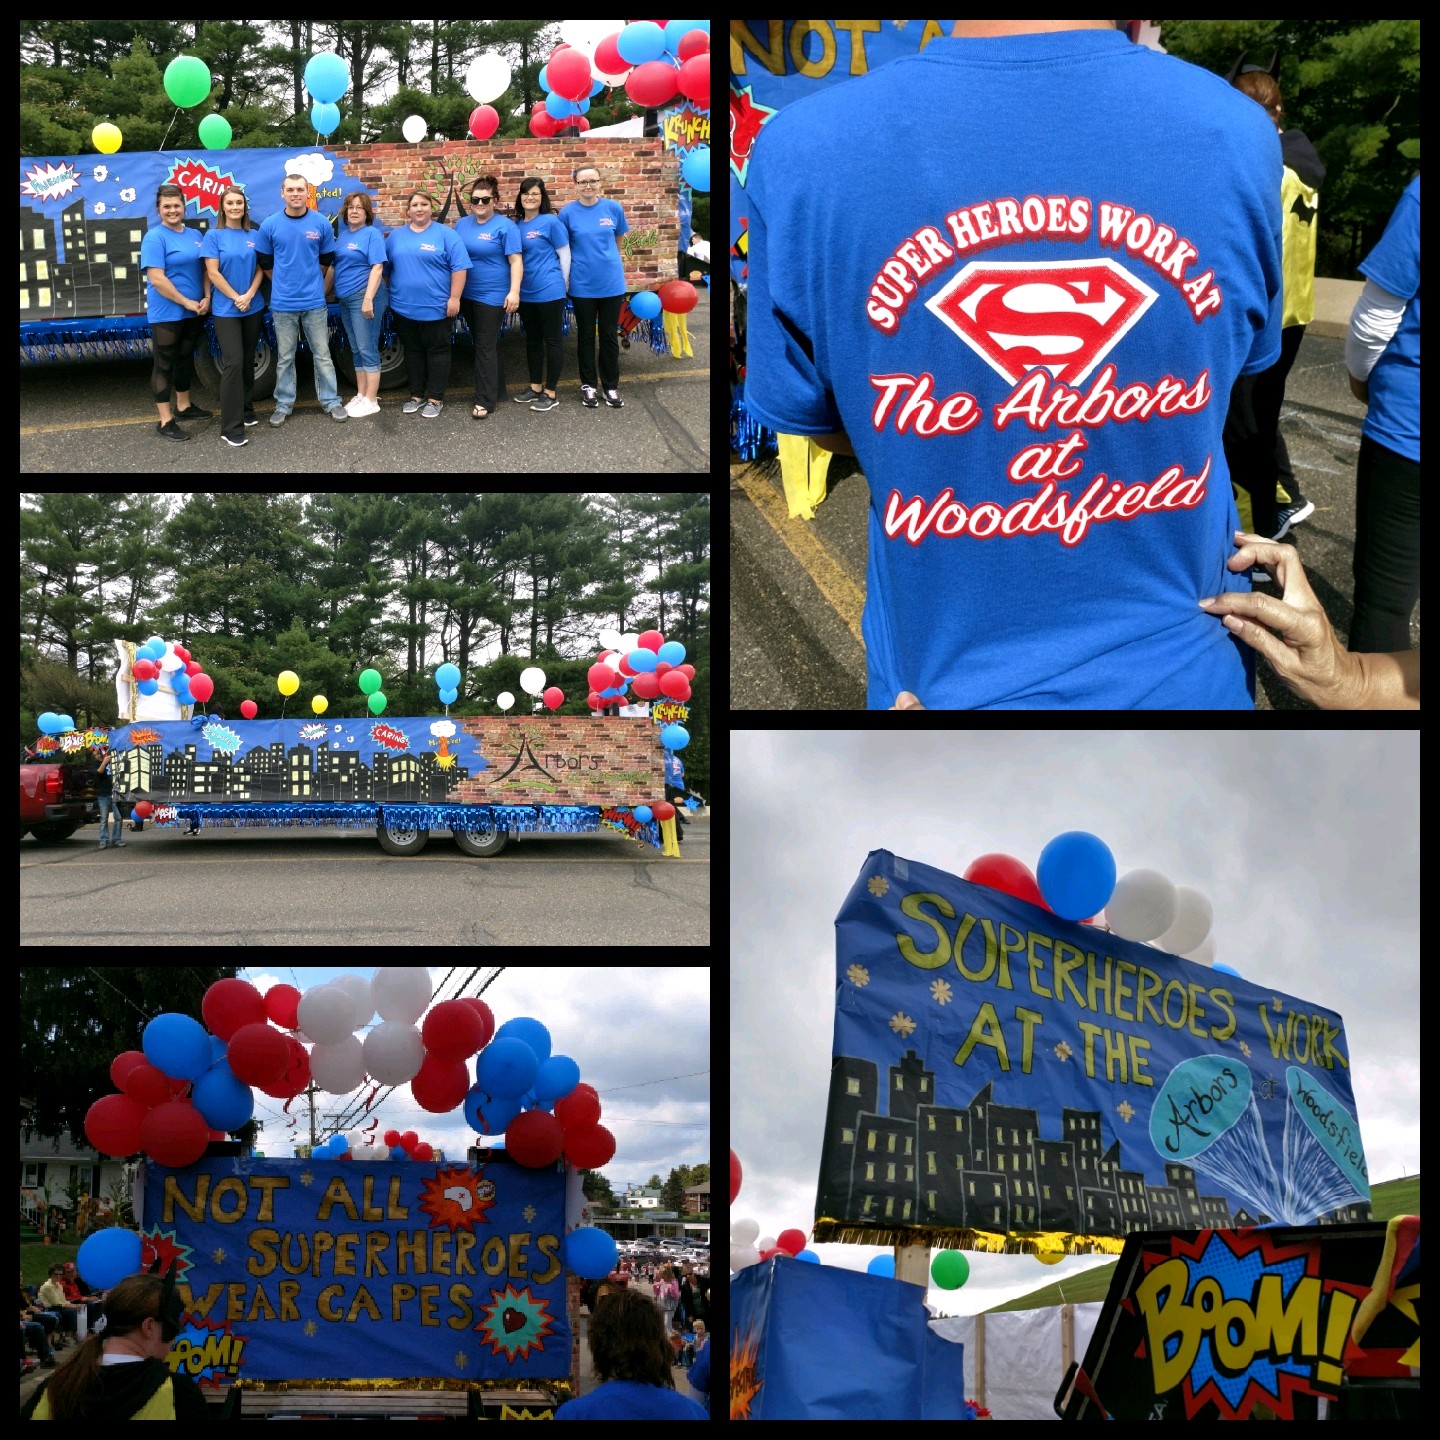 Big Pumpkin Parade collage. Theme was Superheroes work at Arbors at Woodsfield